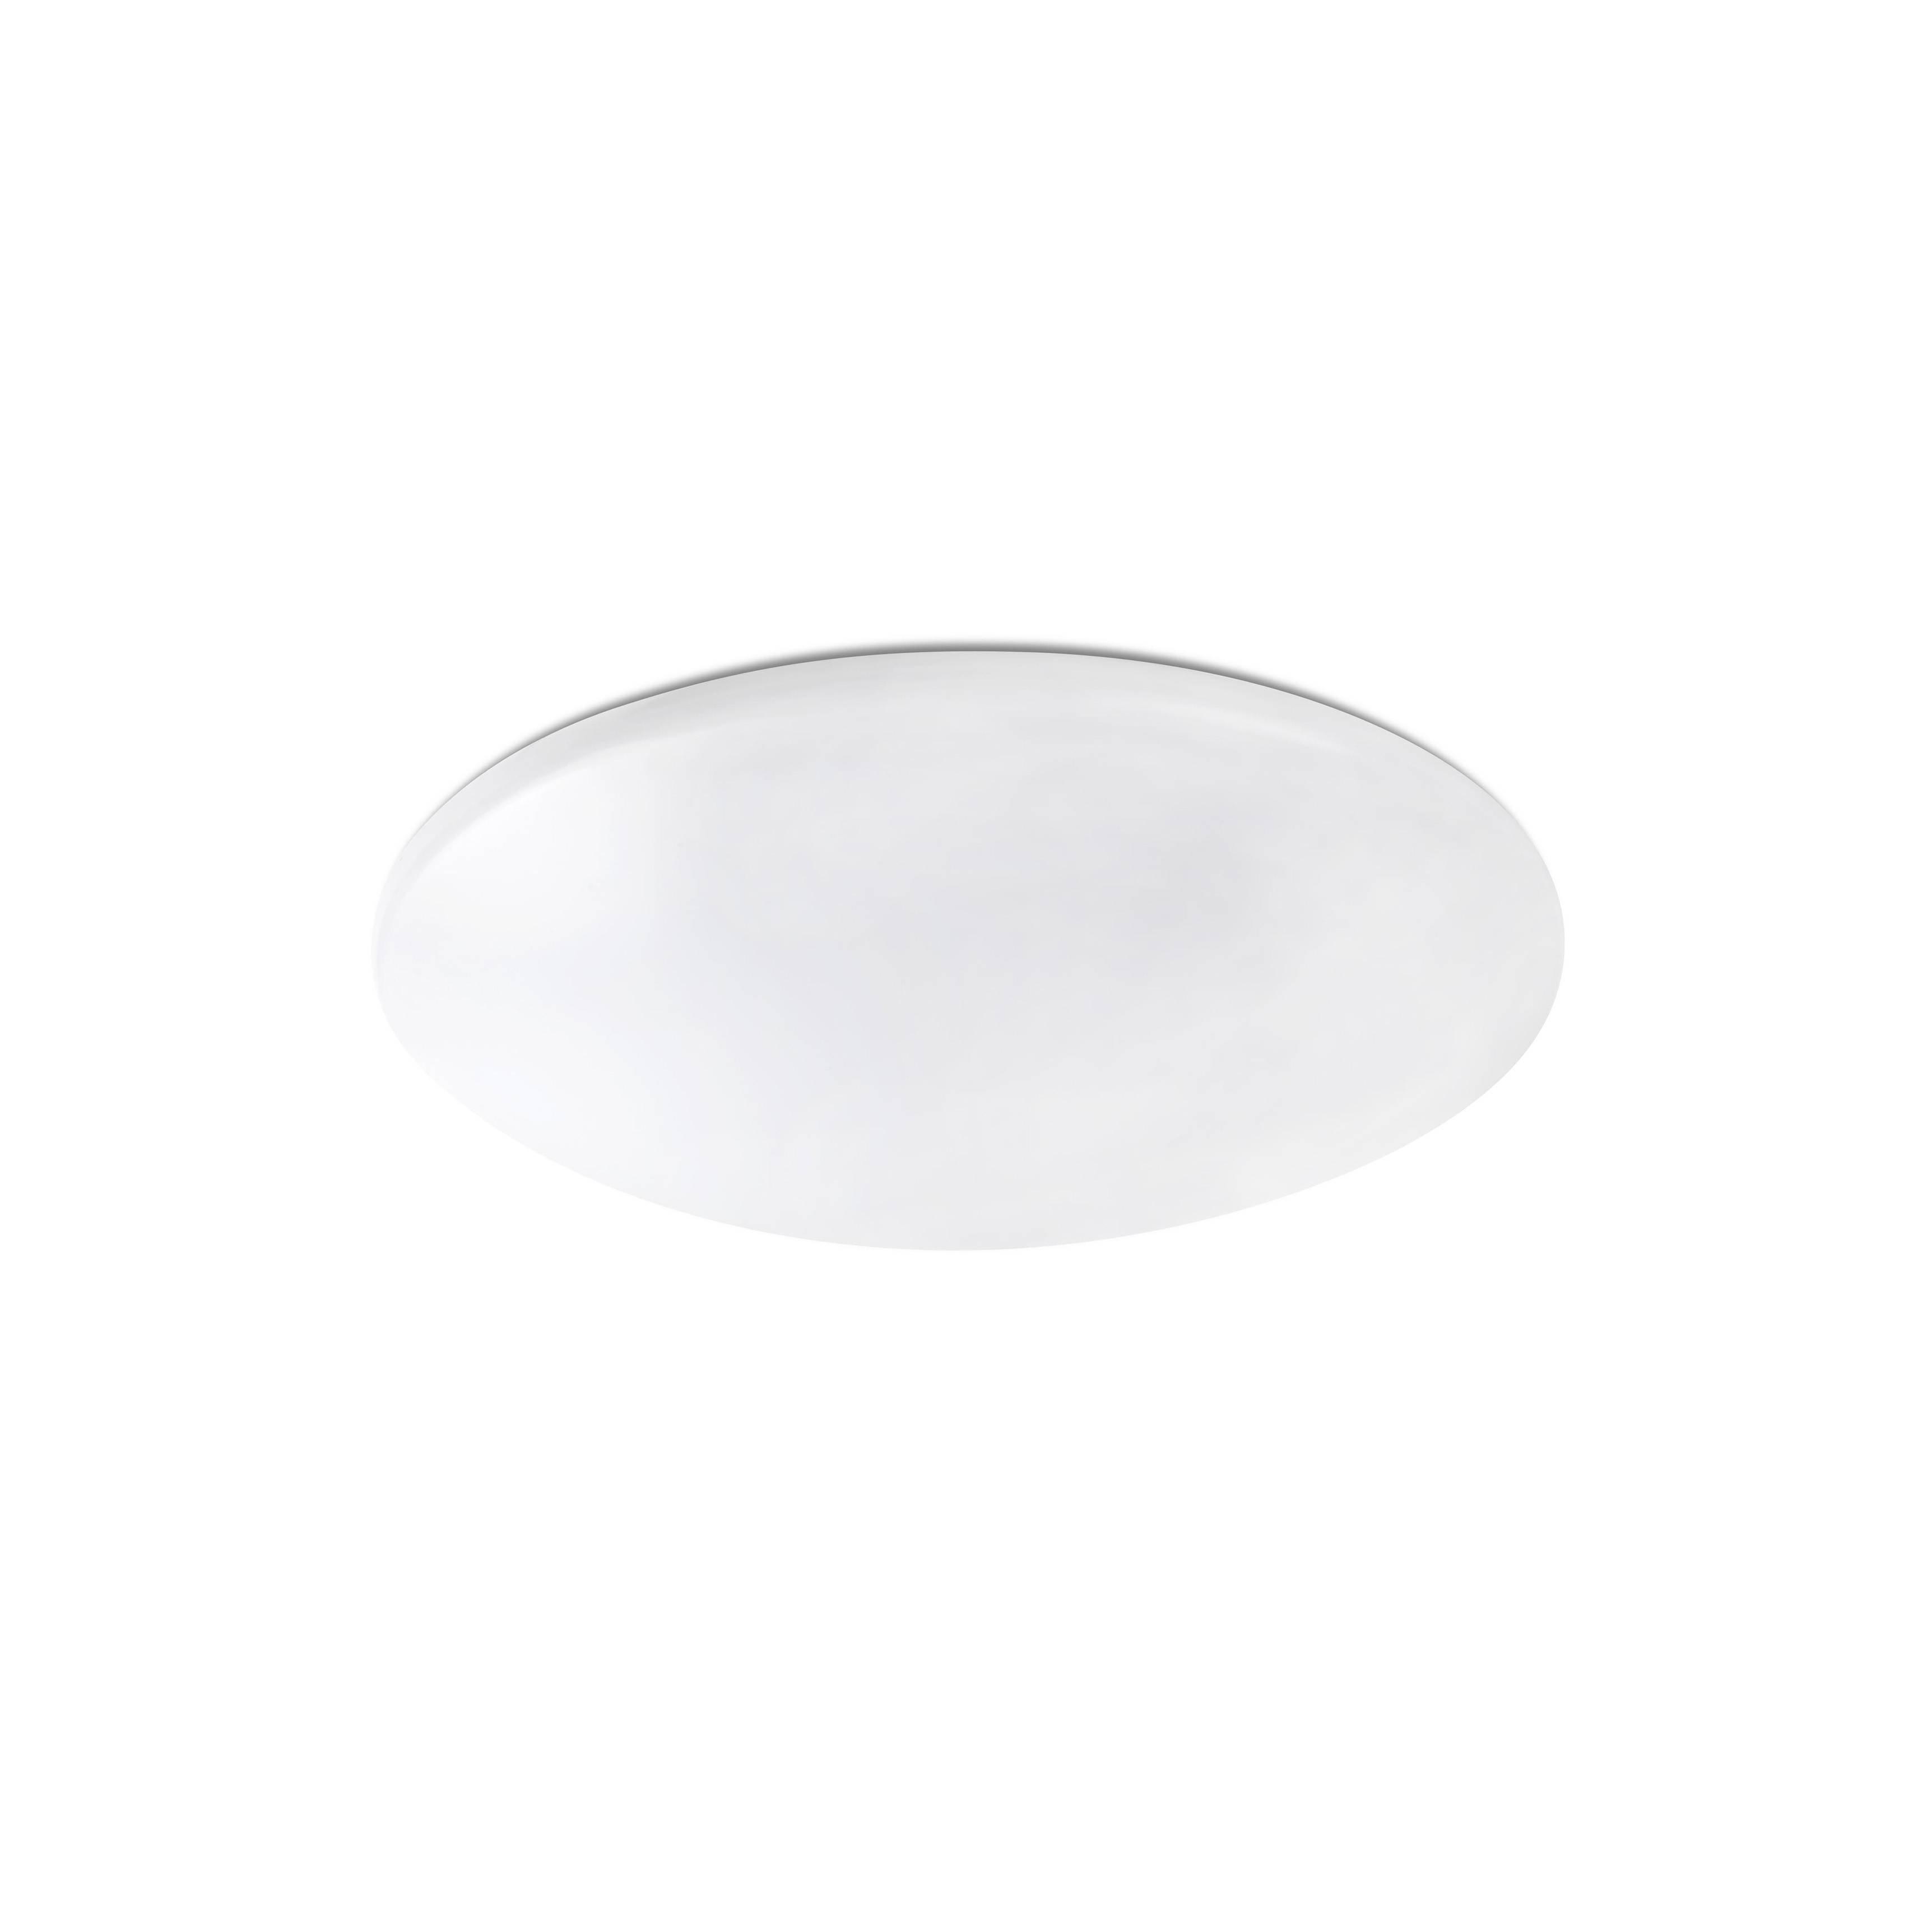 Bic LED Ceiling Lamp 60W Dimmable 3000K